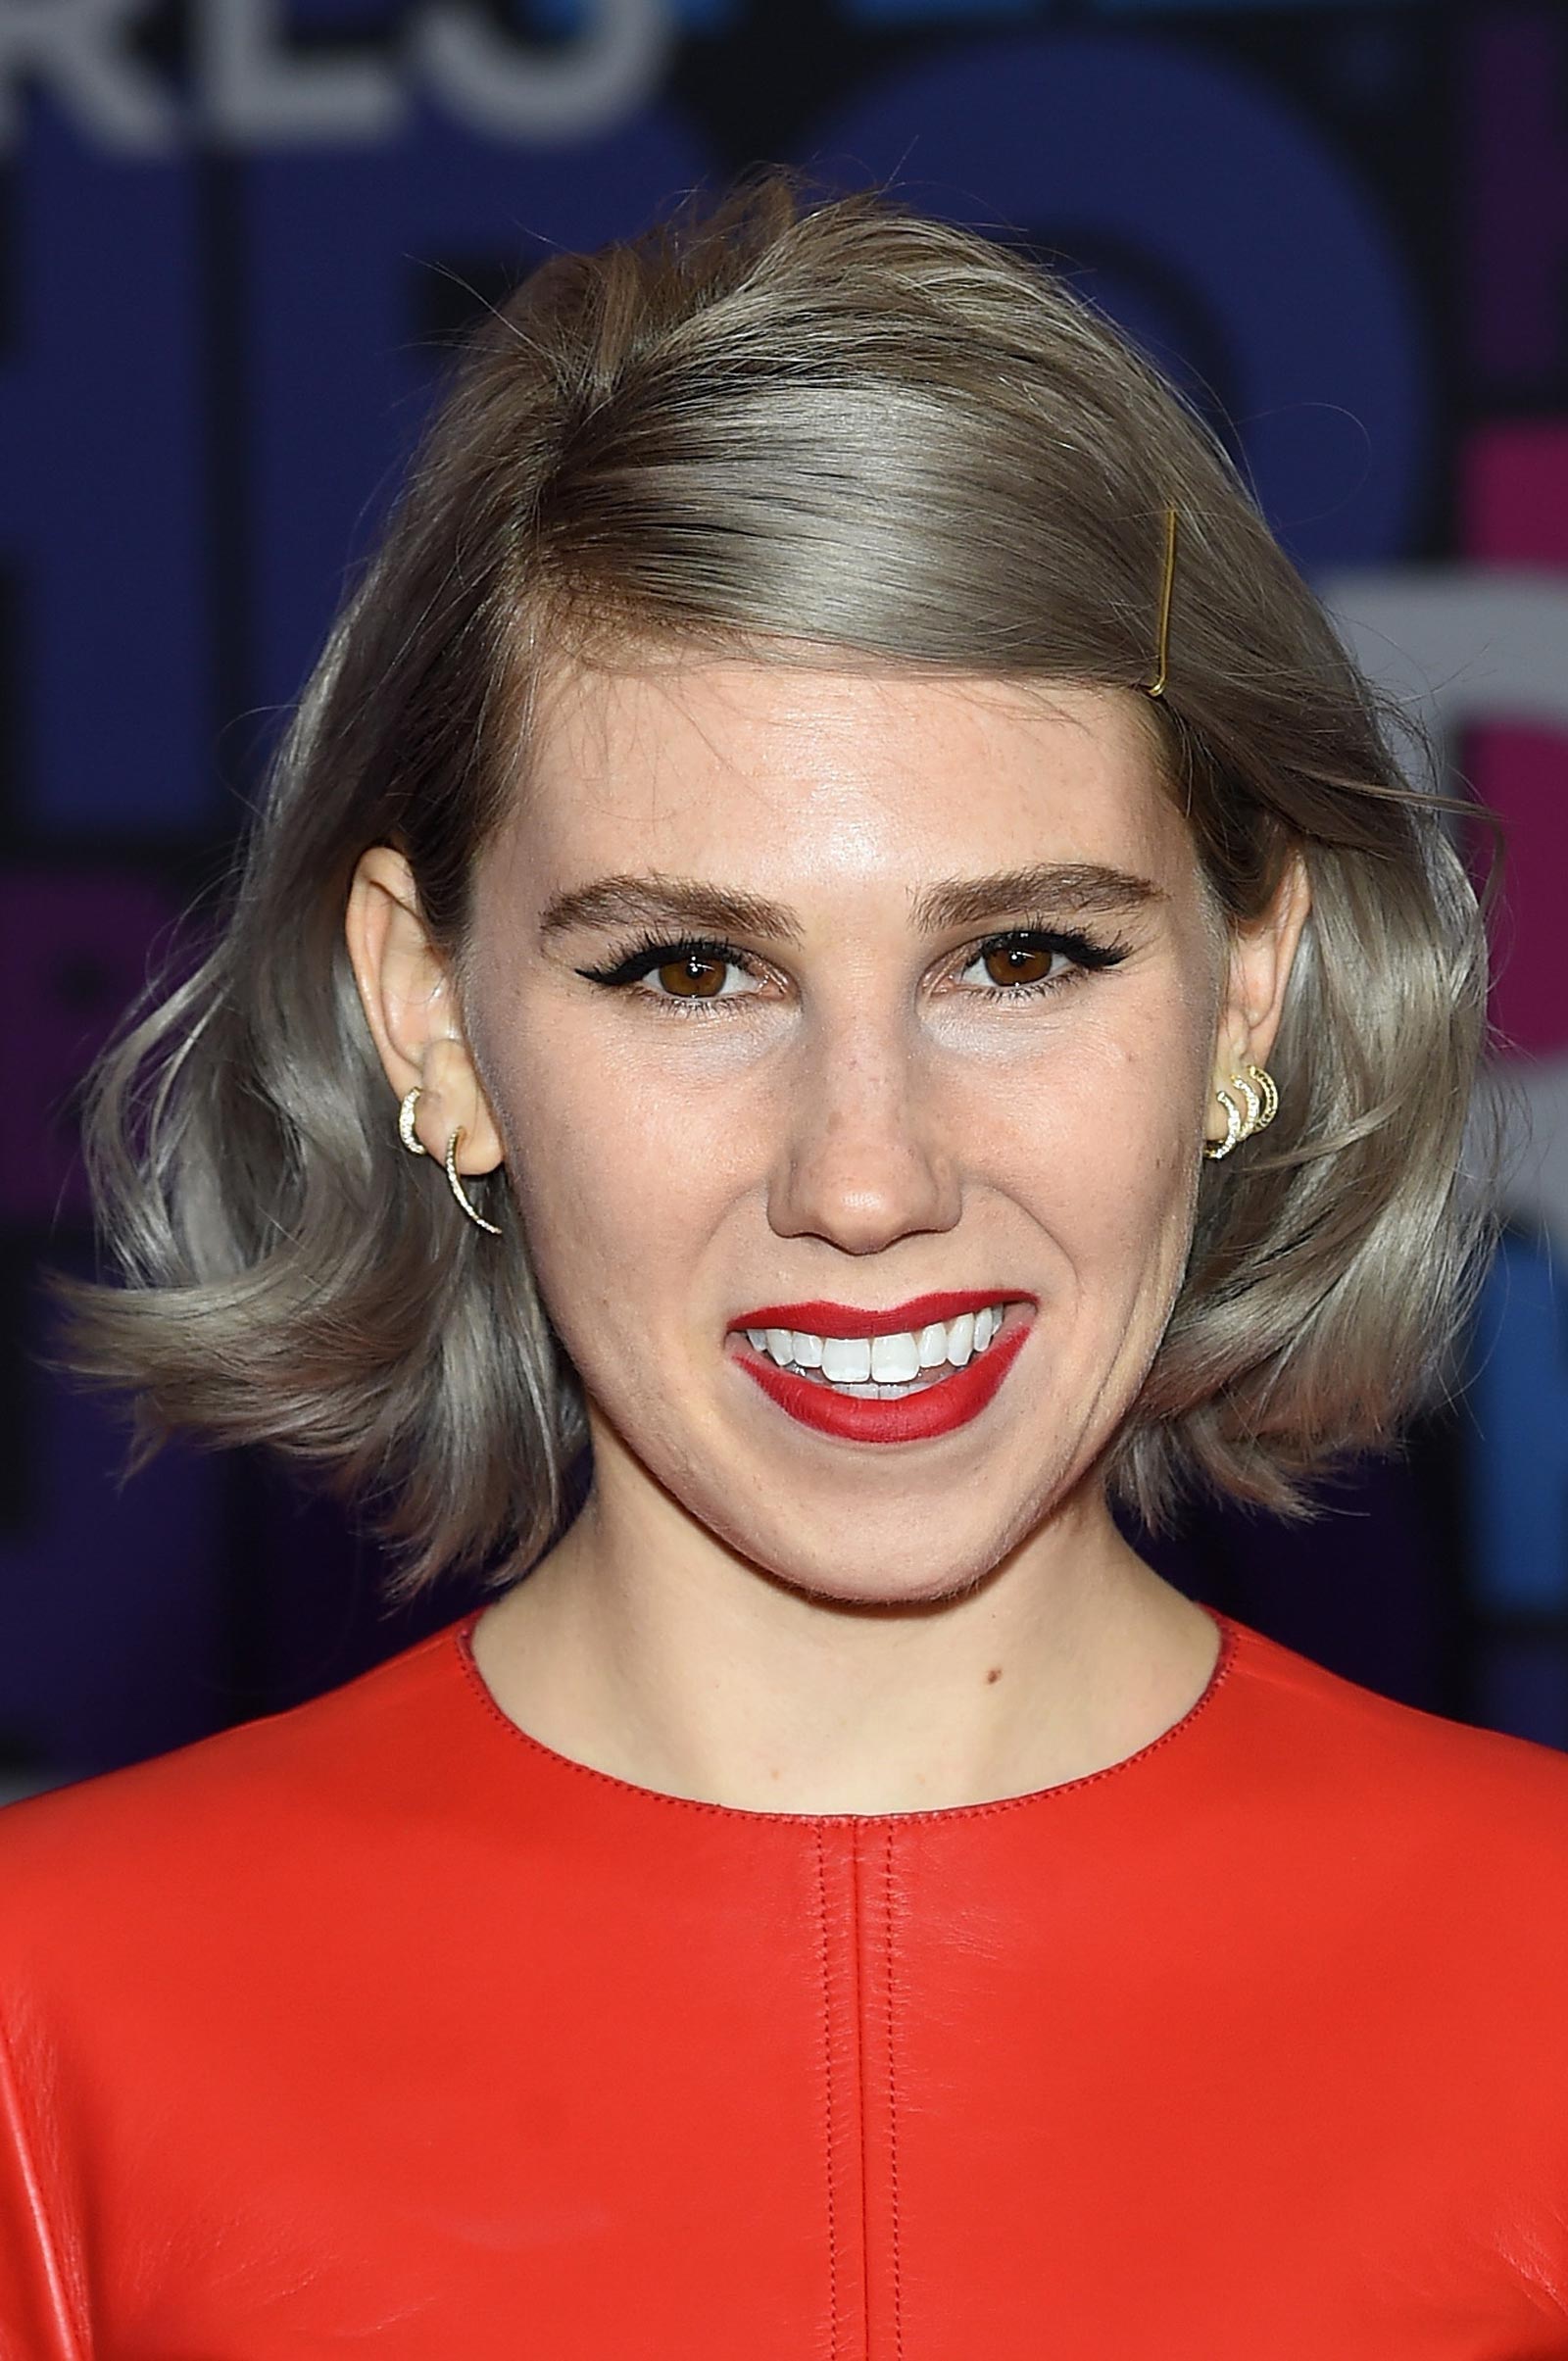 Zosia Mamet attends the fourth season premiere of Girls